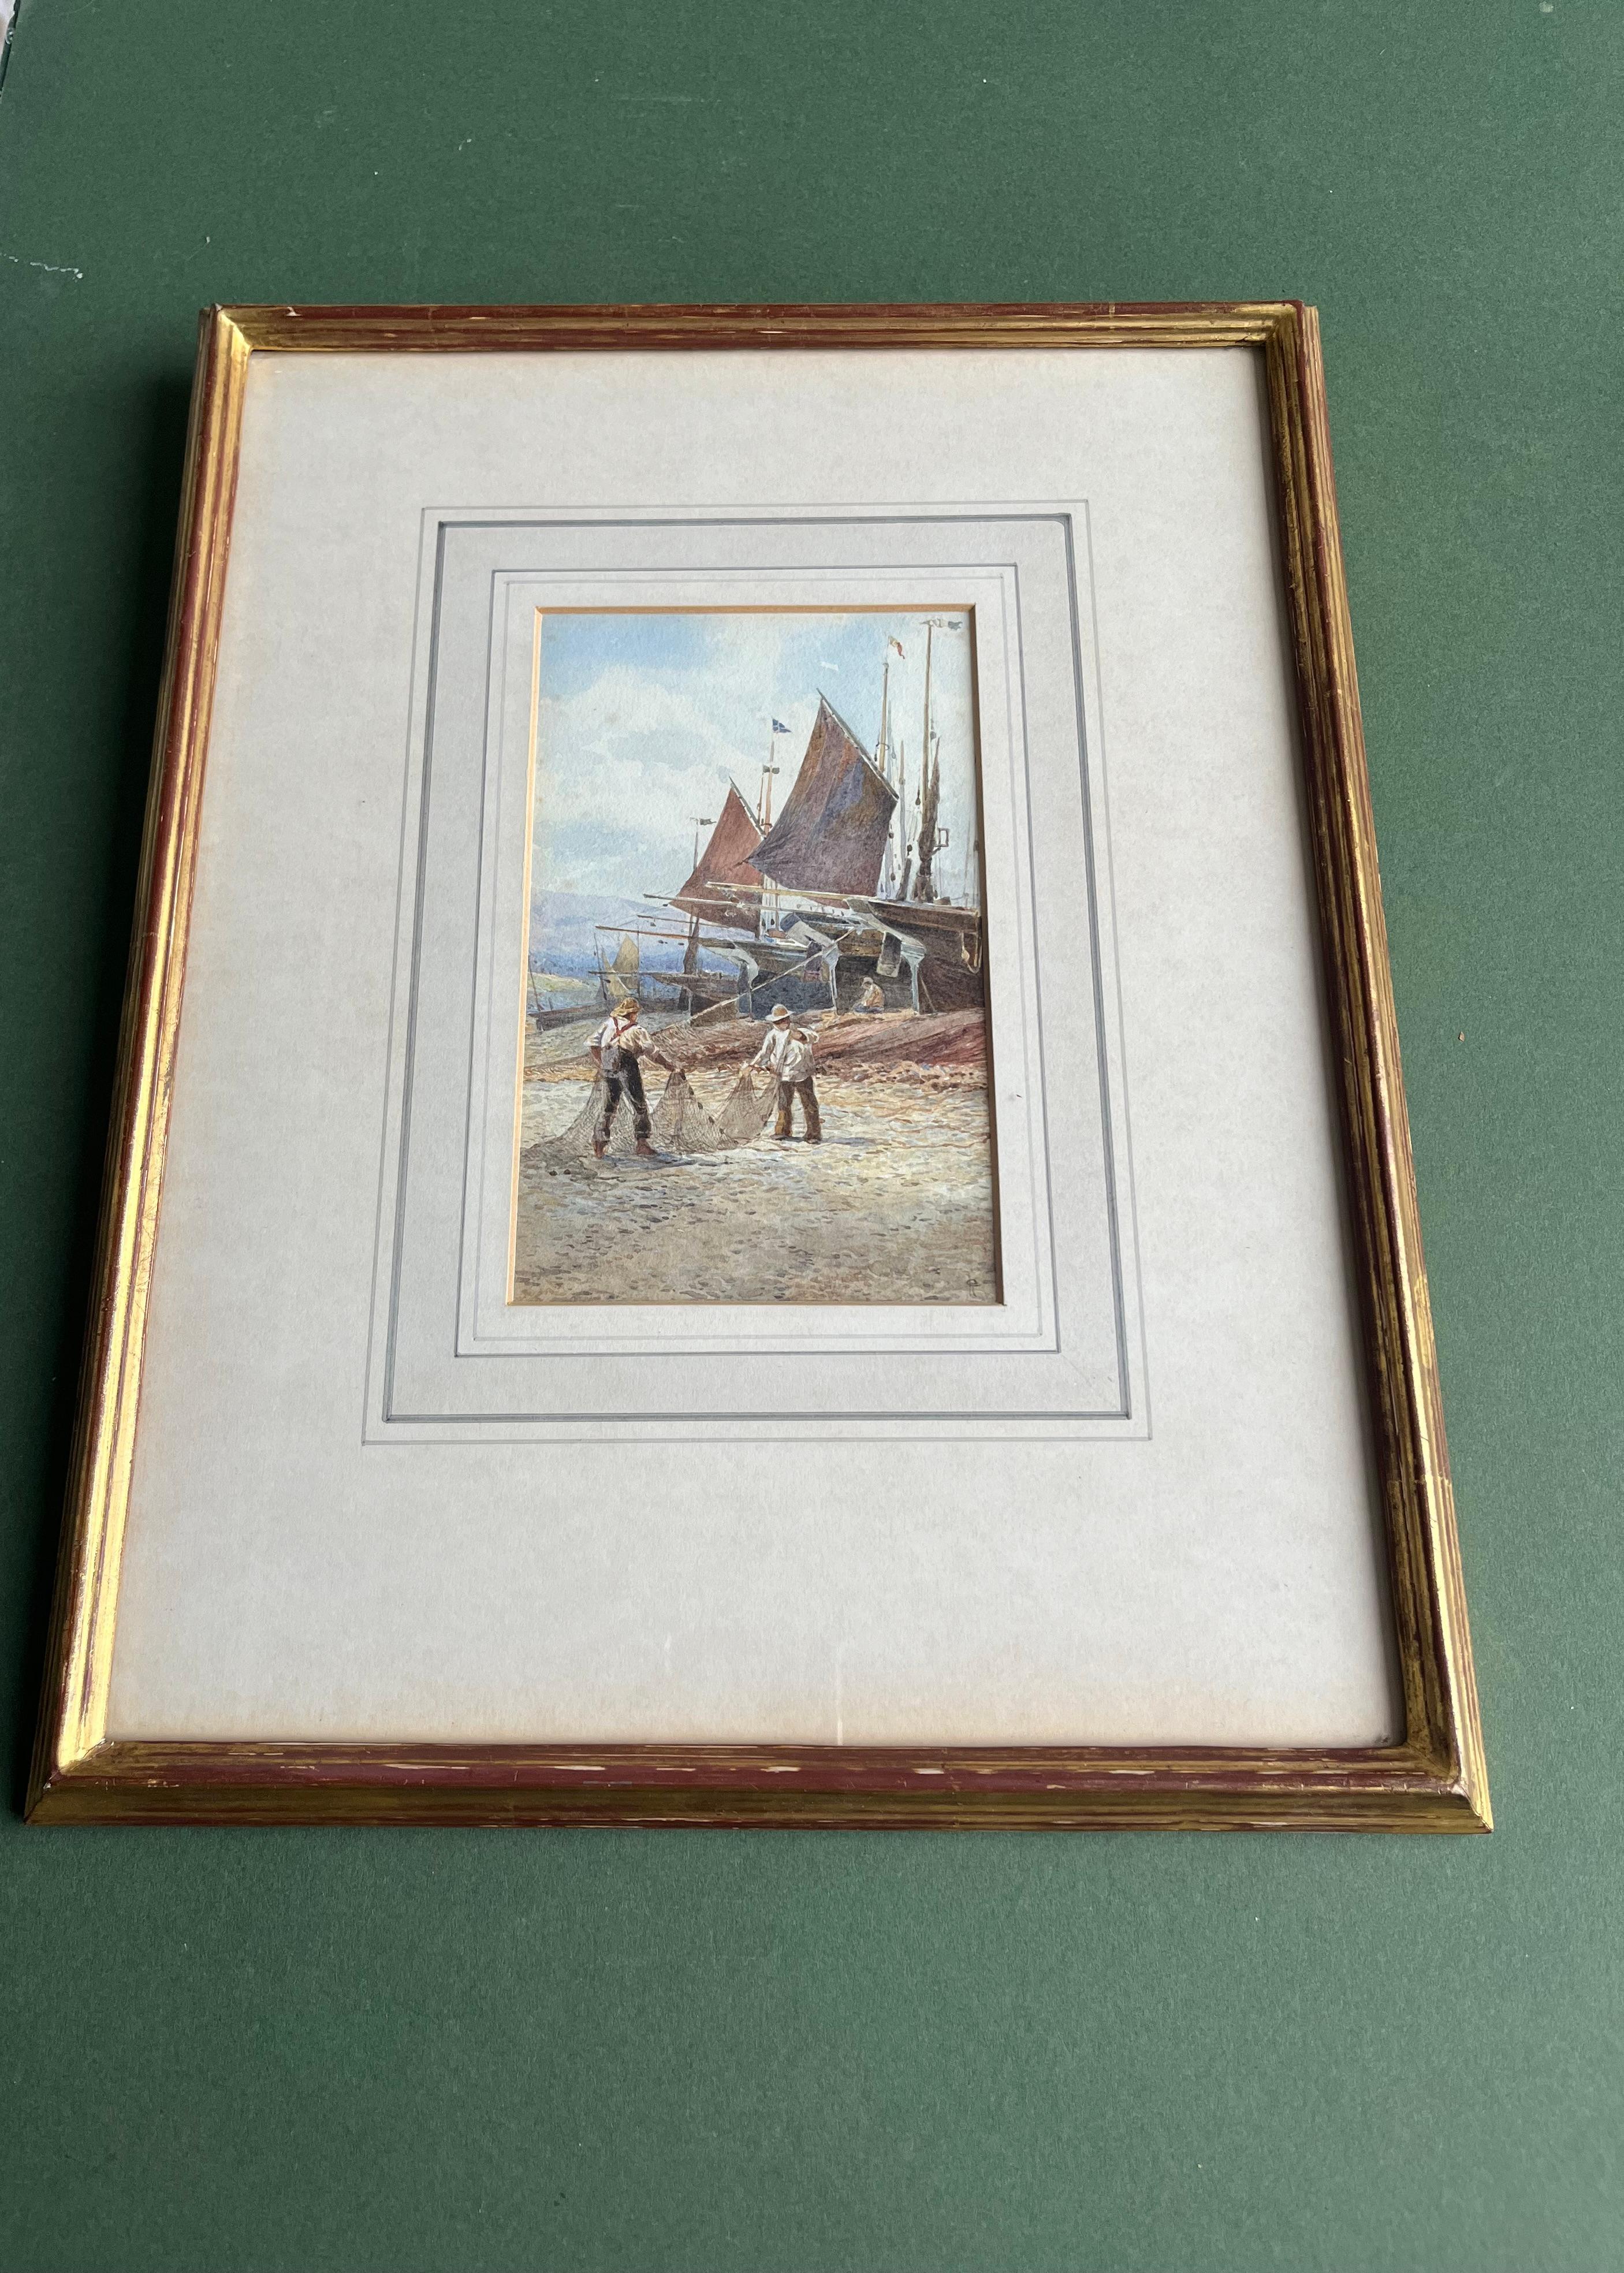 Two delightful watercolours,  with wonderful details by the highly collectable Charles Robertson. They depict two different aspects of Victorian life, the first captures two boys fishing before a windmill and the second fishermen on the shore